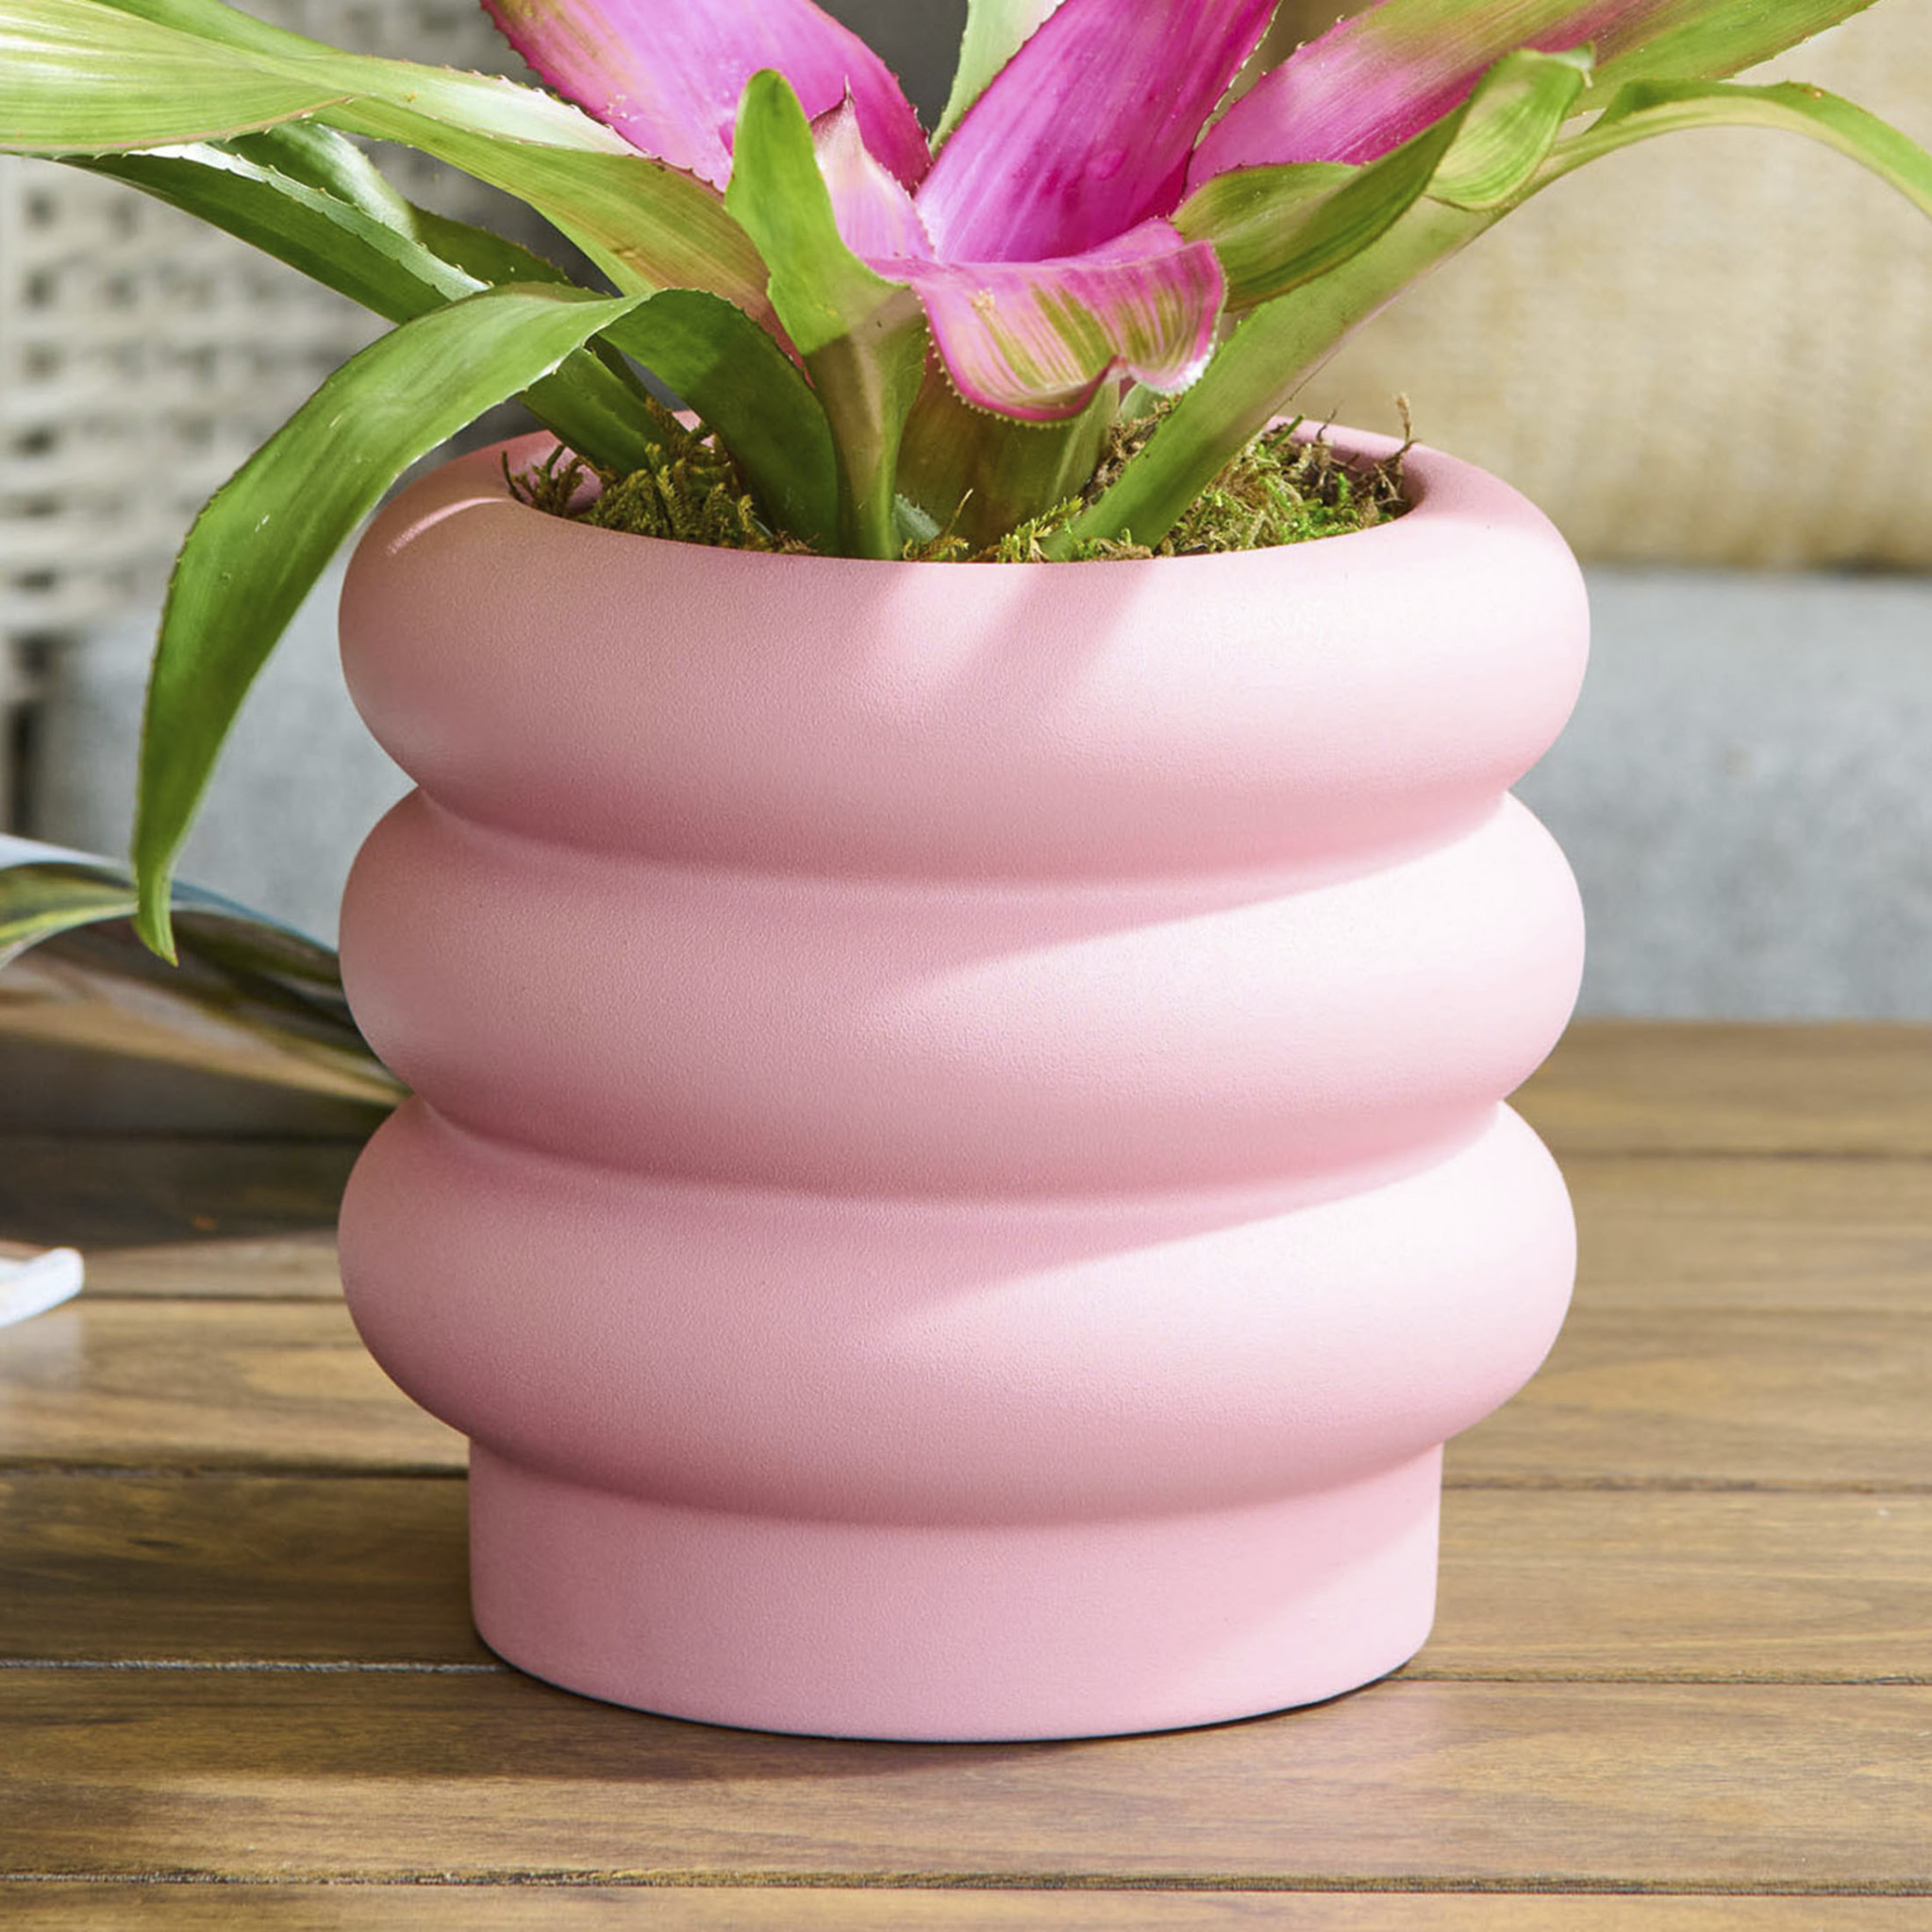 Better Homes & Gardens Pottery 6" Chinooke Ceramic Bubble Planter, Pink - image 1 of 9